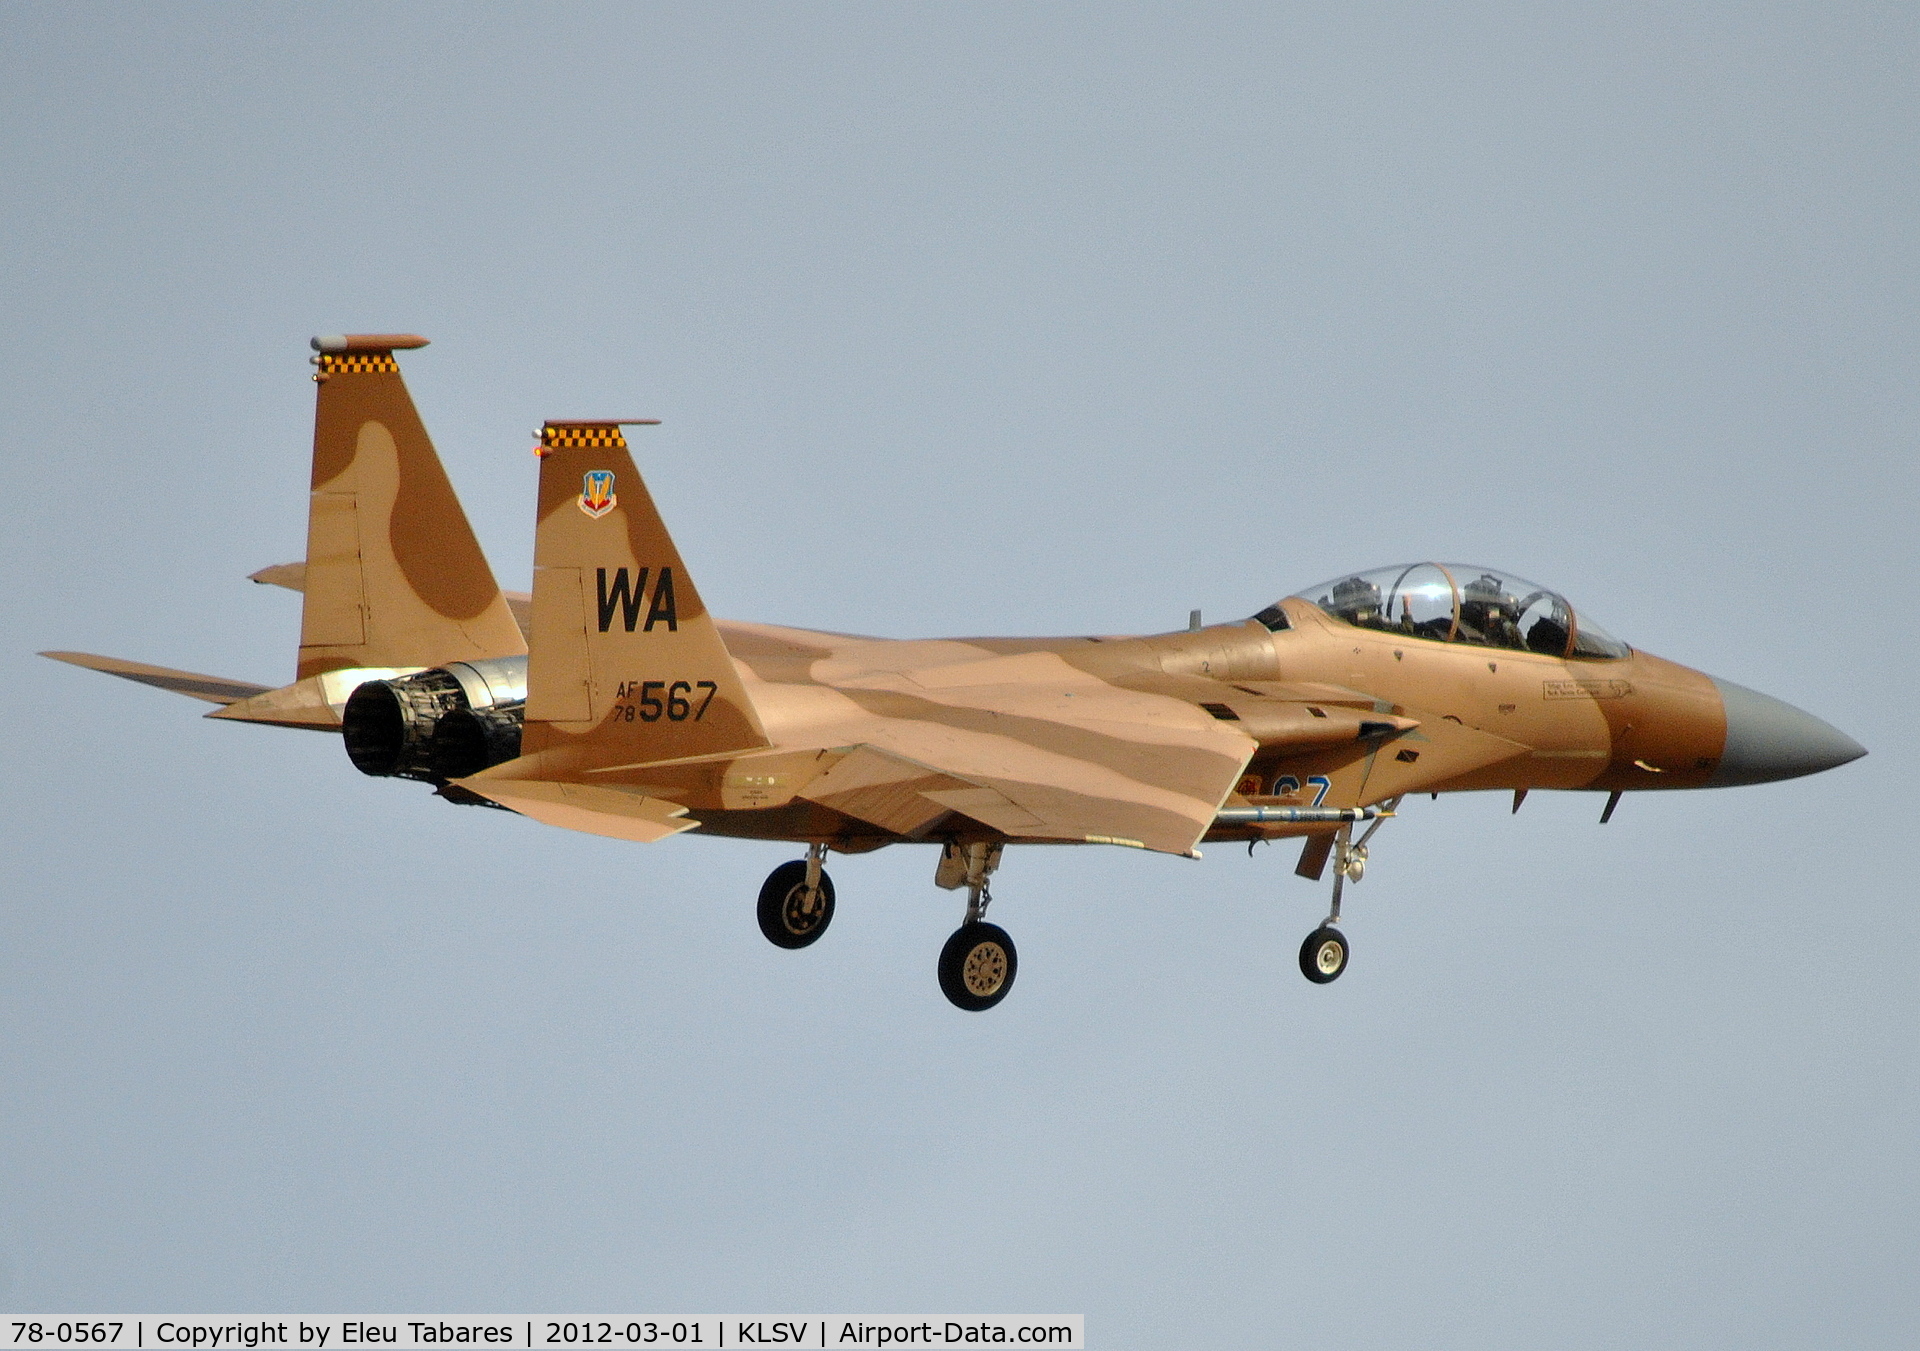 78-0567, McDonnell Douglas F-15D Eagle C/N 0489/D007, Taken during Red Flag Exercise at Nellis Air Force Base, Nevada.